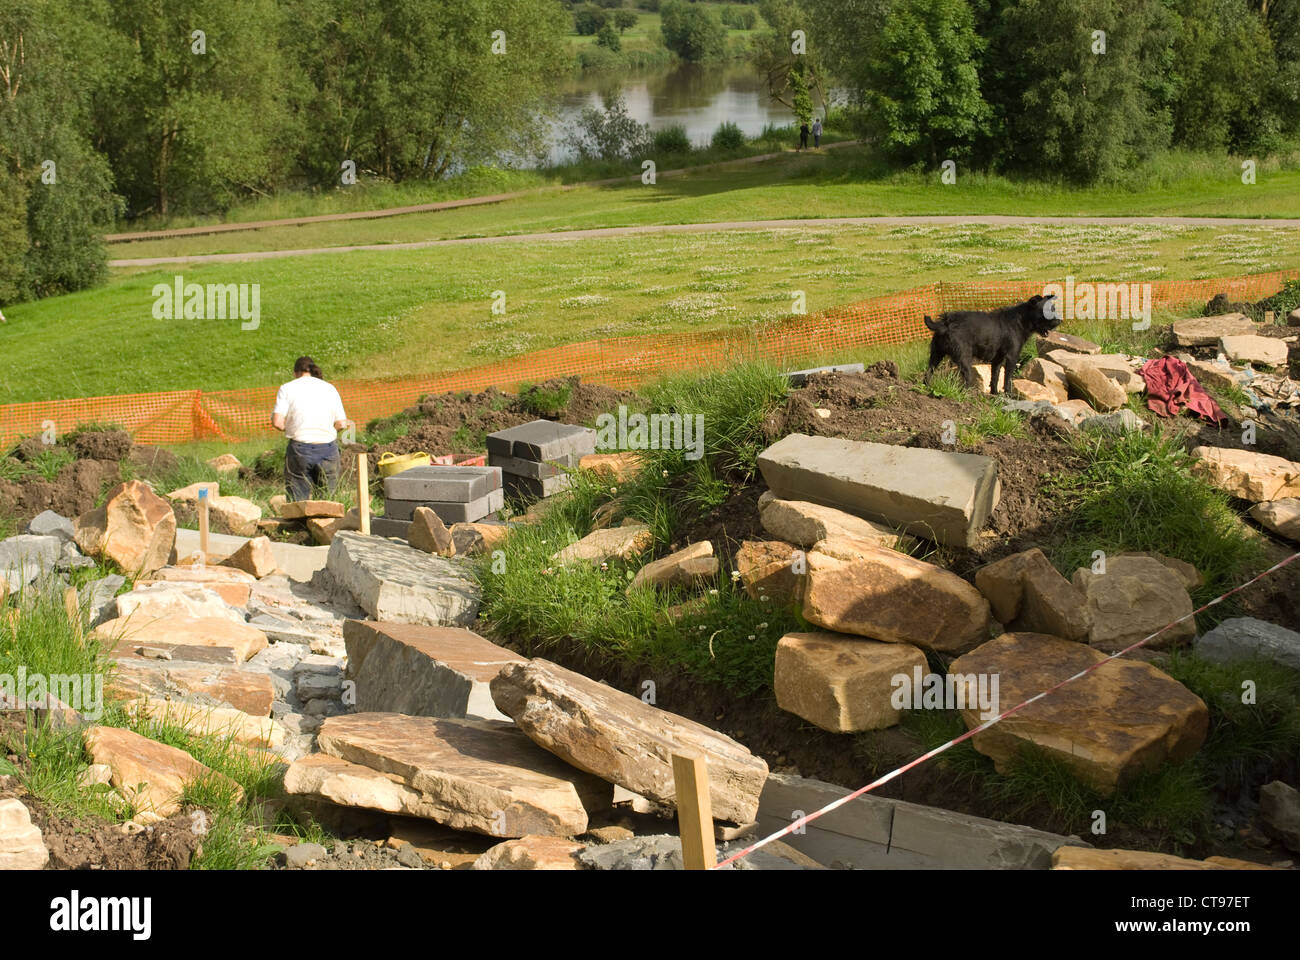 Landscape gardeners at work with dog Stock Photo